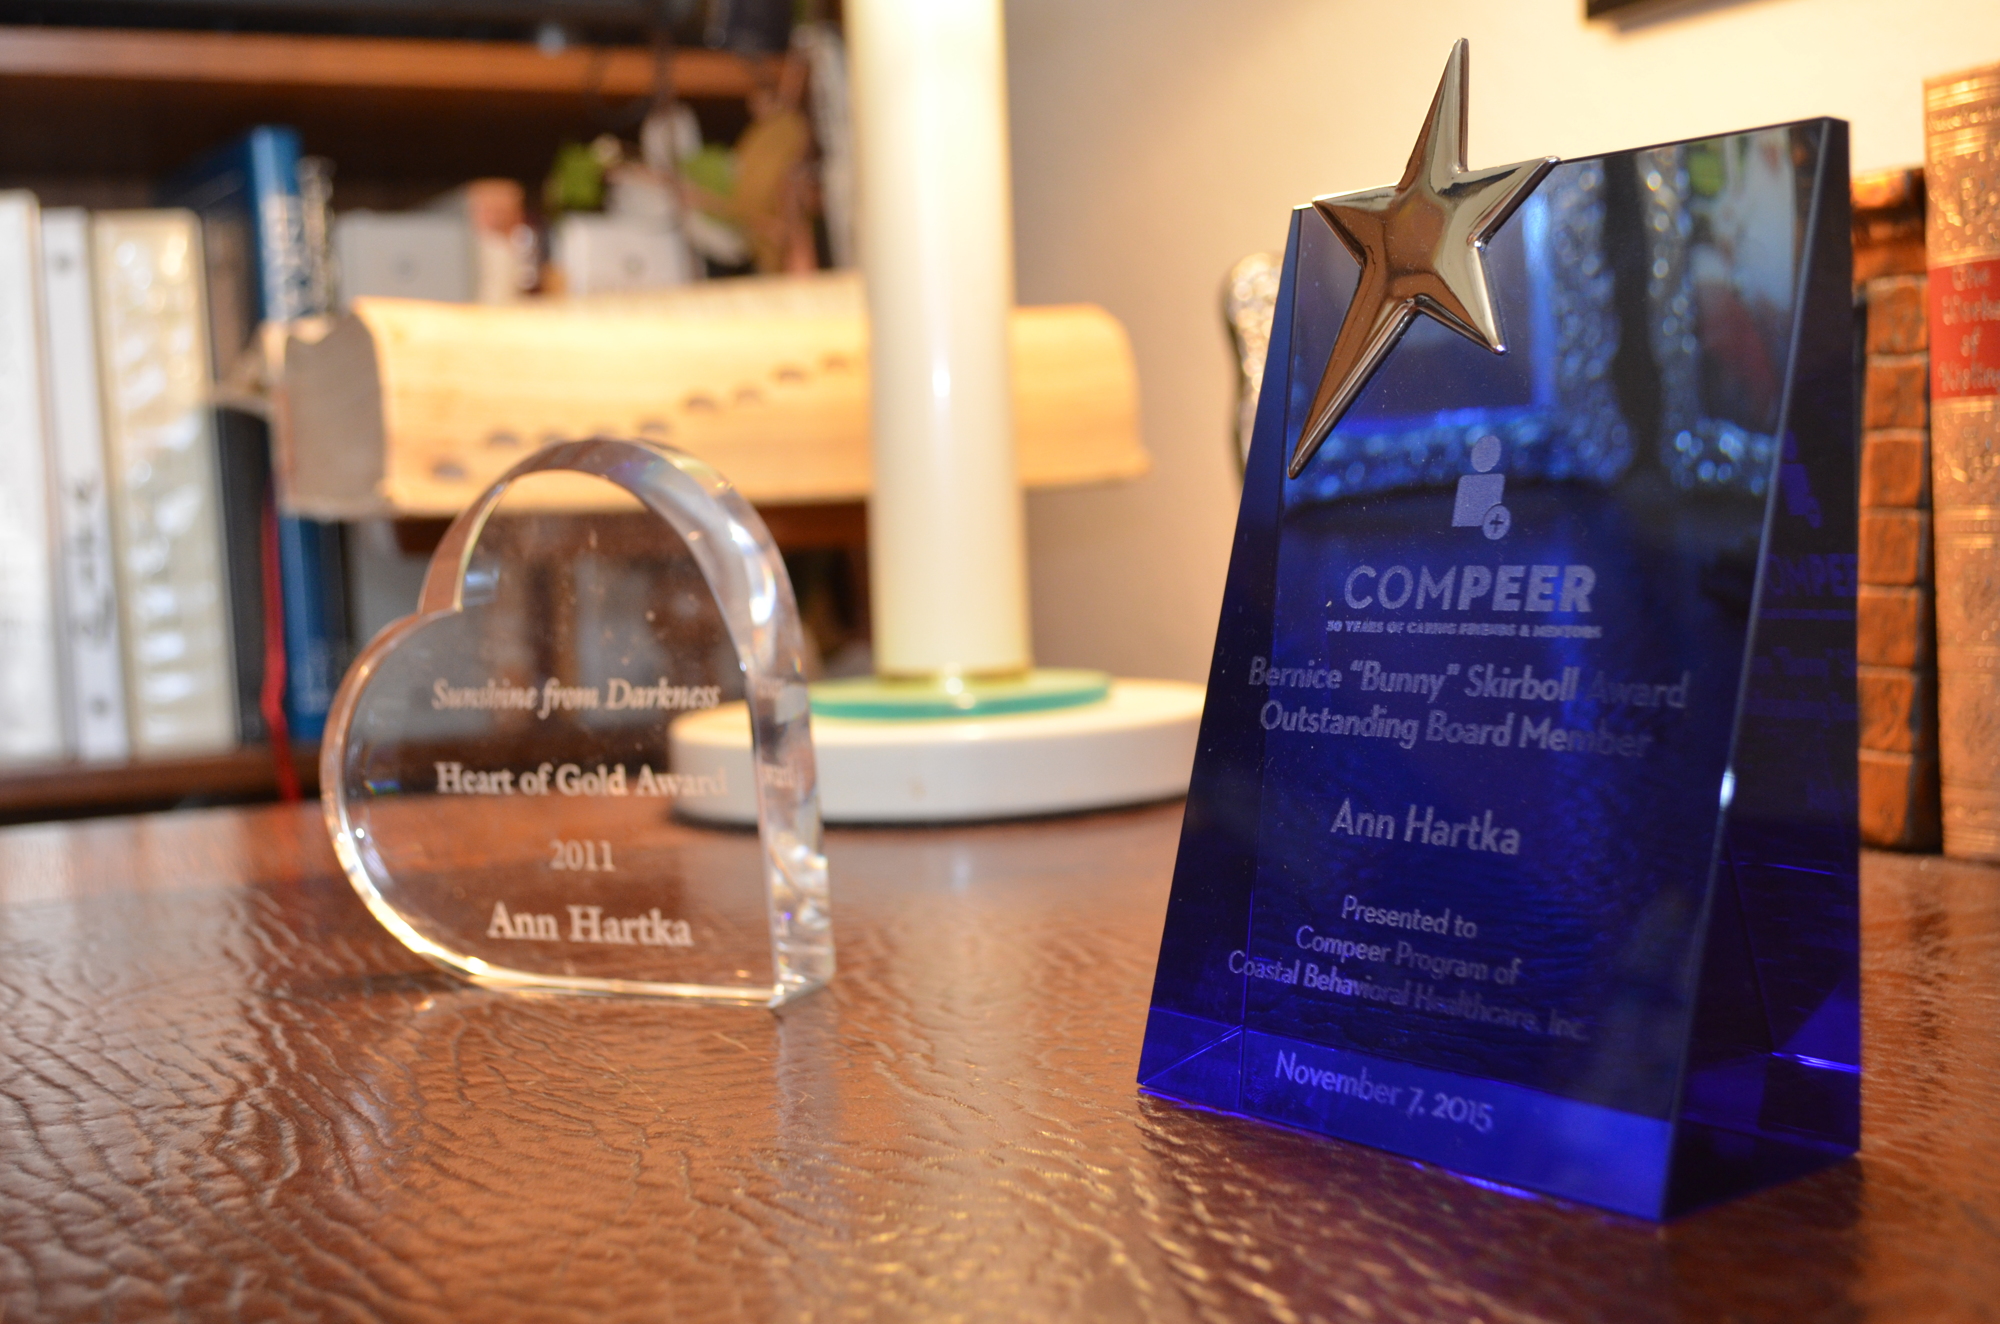 Various awards such as the 2011 Heart of Gold Award from Sunshine from Darkness and the 2015 Bernice “Bunny” Skirboll Award for Outstanding Compeer Board Member, sit on Hartka's desk in her home. Photo by Niki Kottmann.